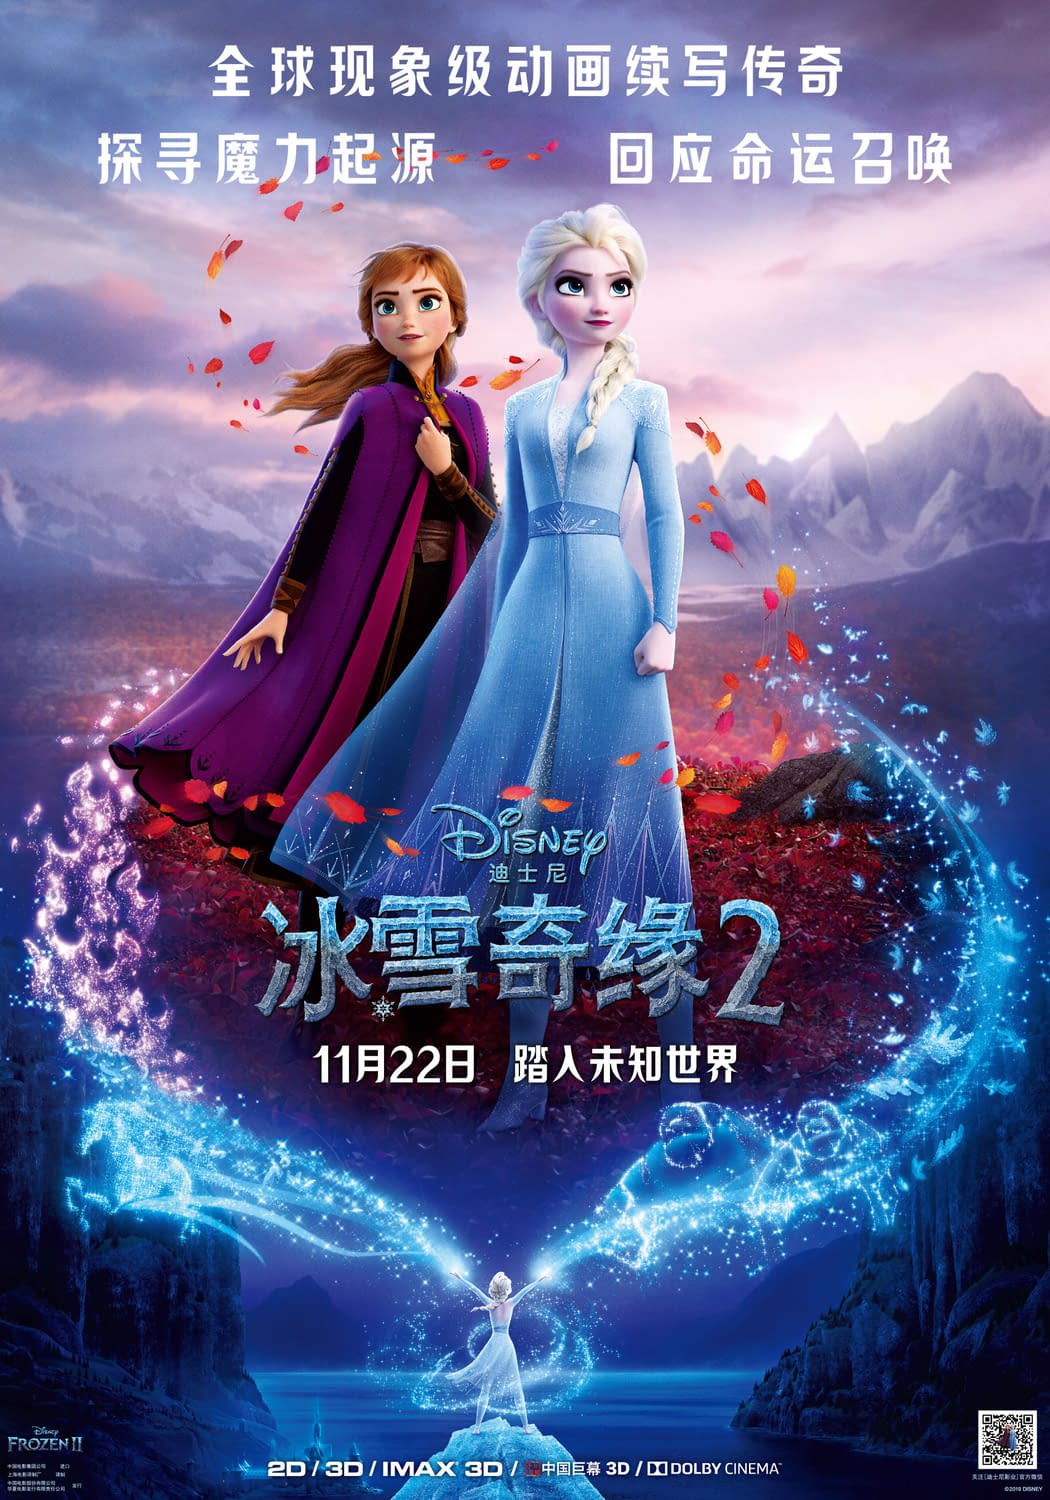 The Cast of "Frozen 2" Talks Reuniting Plus More Character Posters